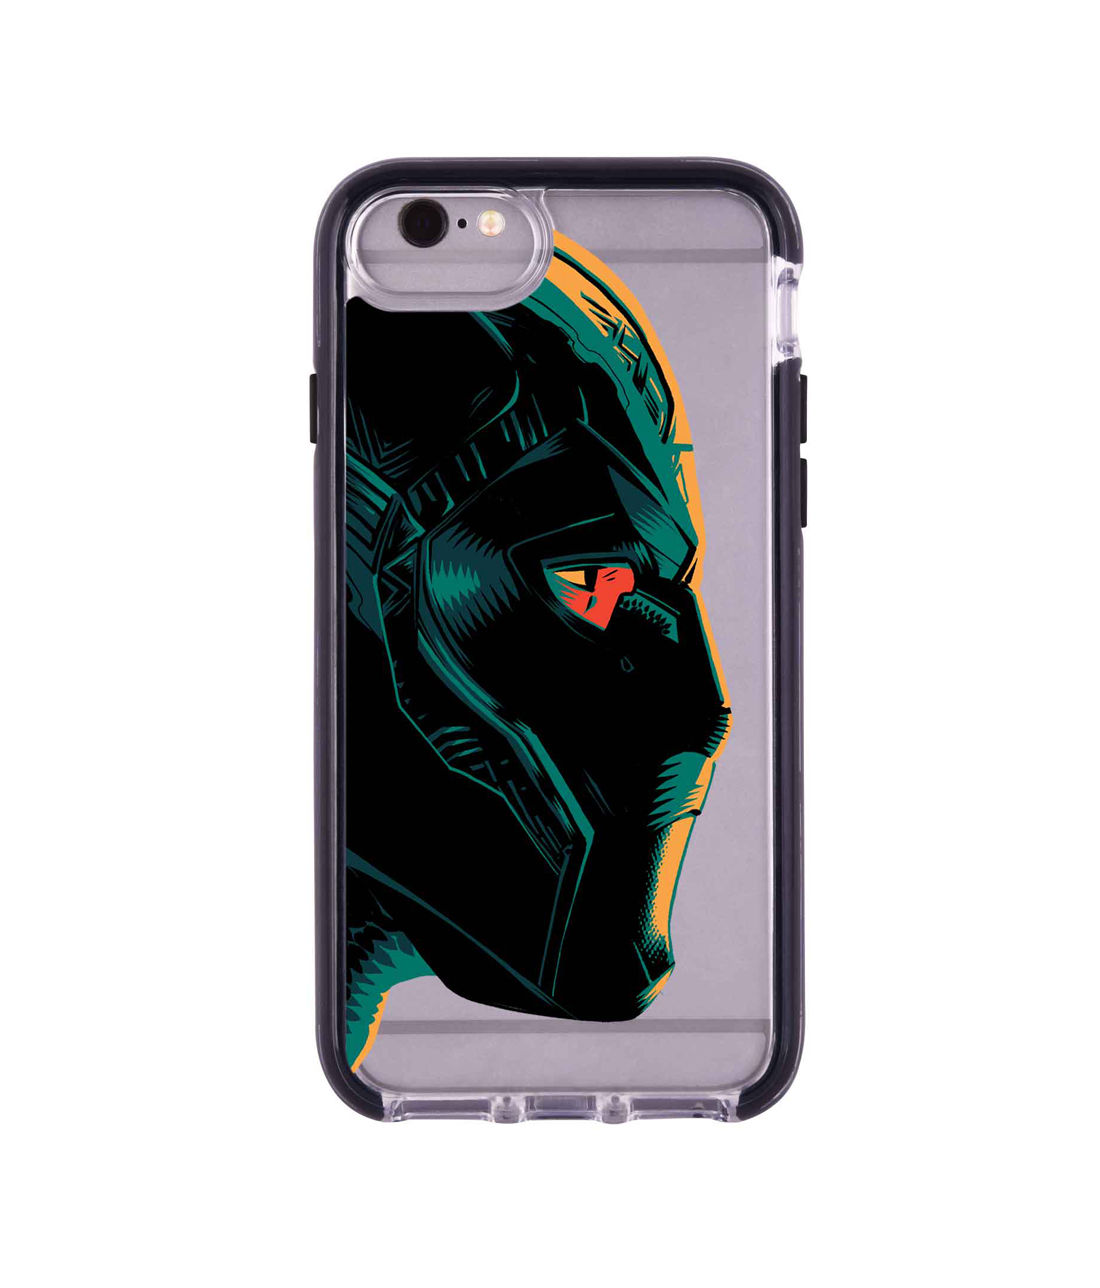 Illuminated Black Panther - Extreme Phone Case for iPhone 6S Plus